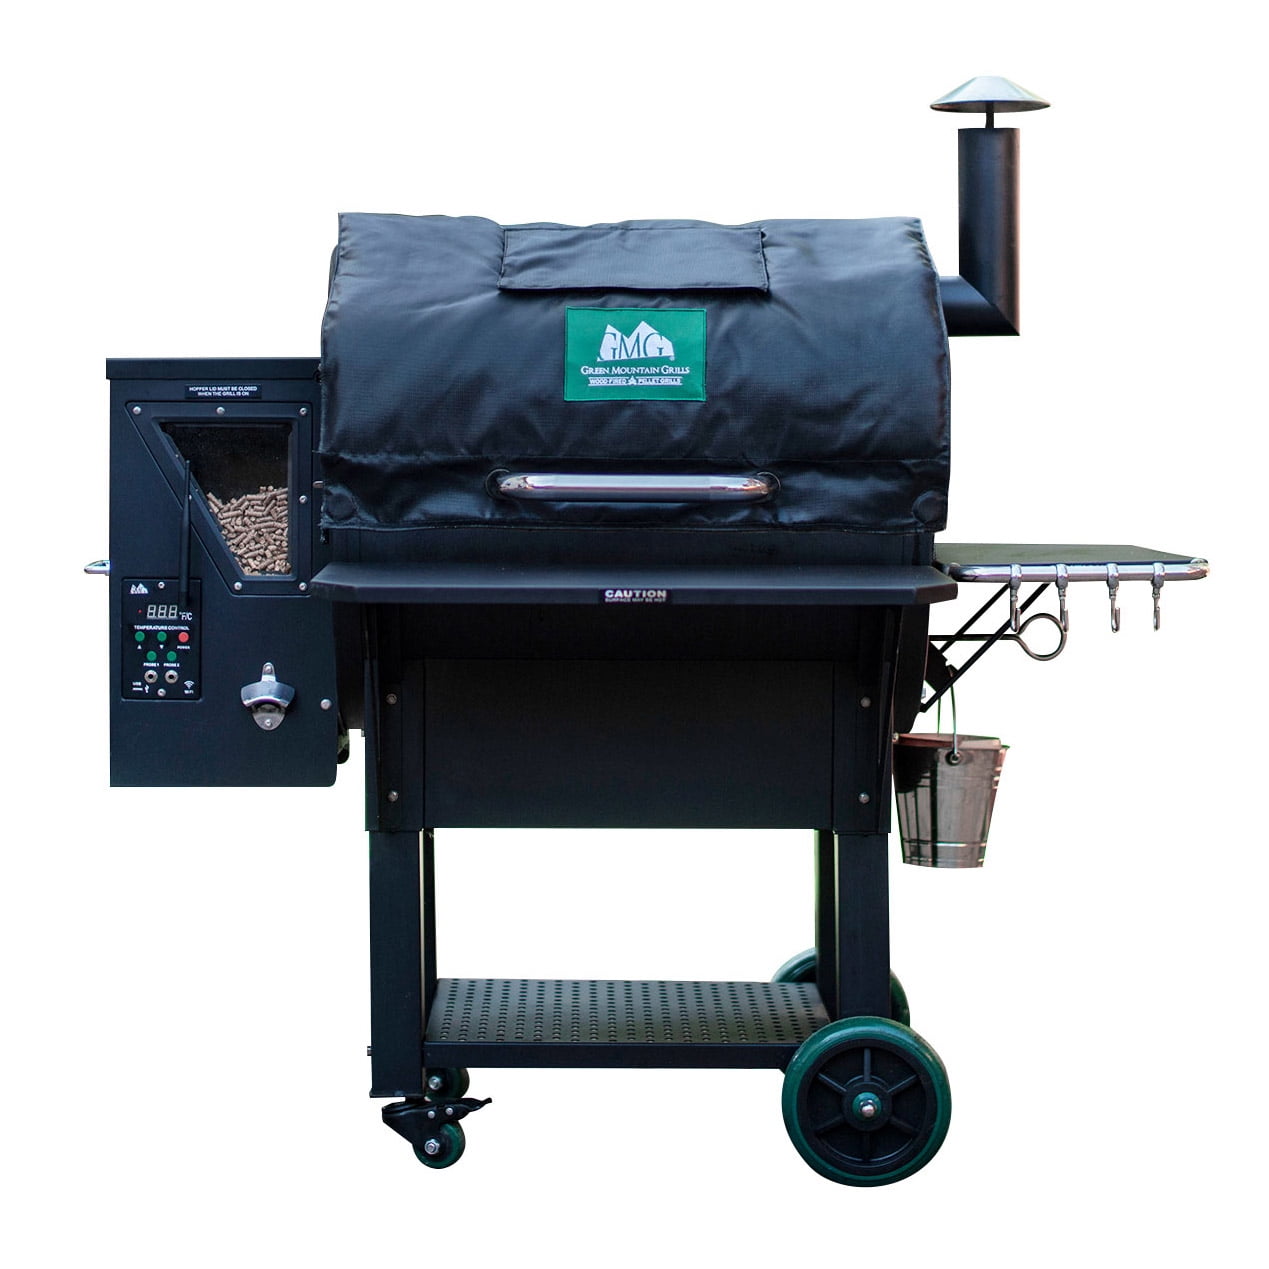 GMG Daniel Boone Cover for Prime WiFi Grills GMG-3003 